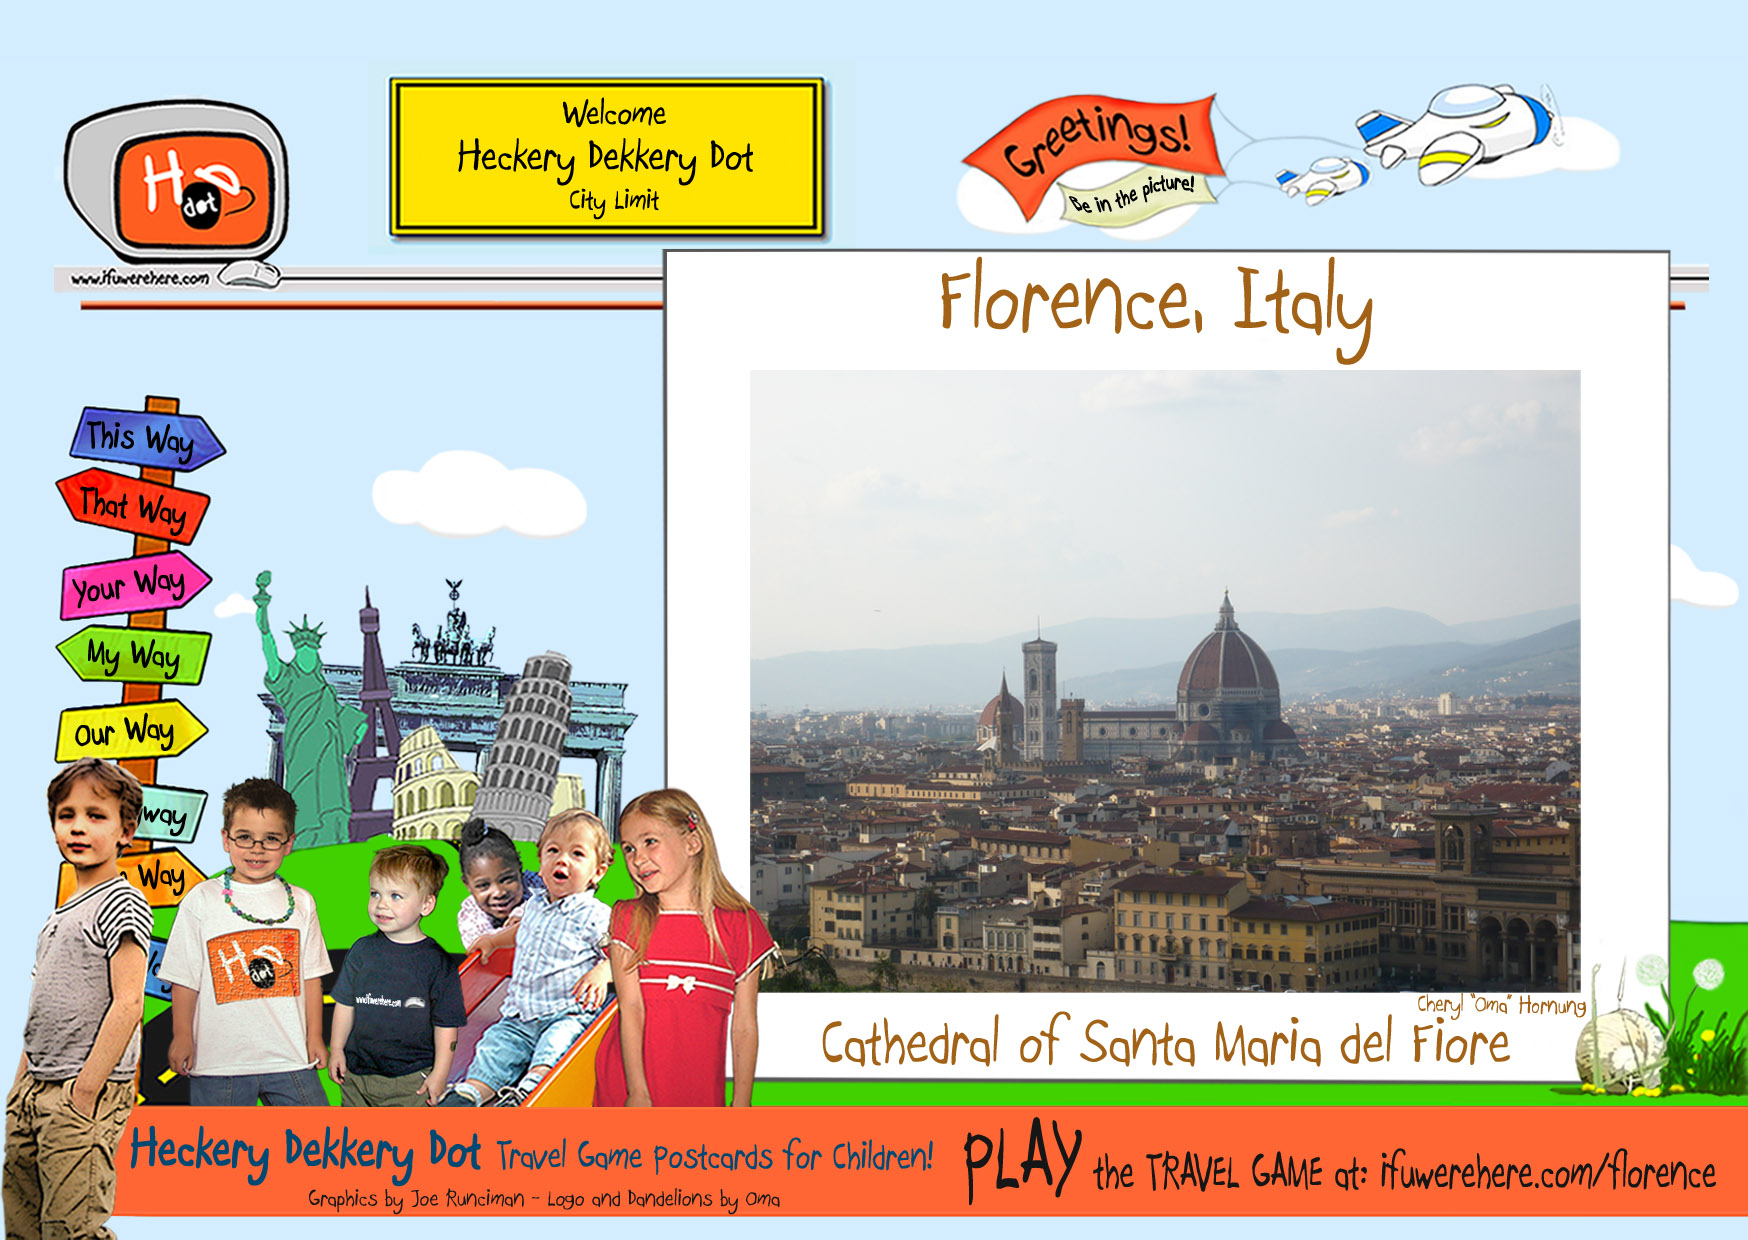 (1) “Florence” comes from an Italian word meaning “flower!